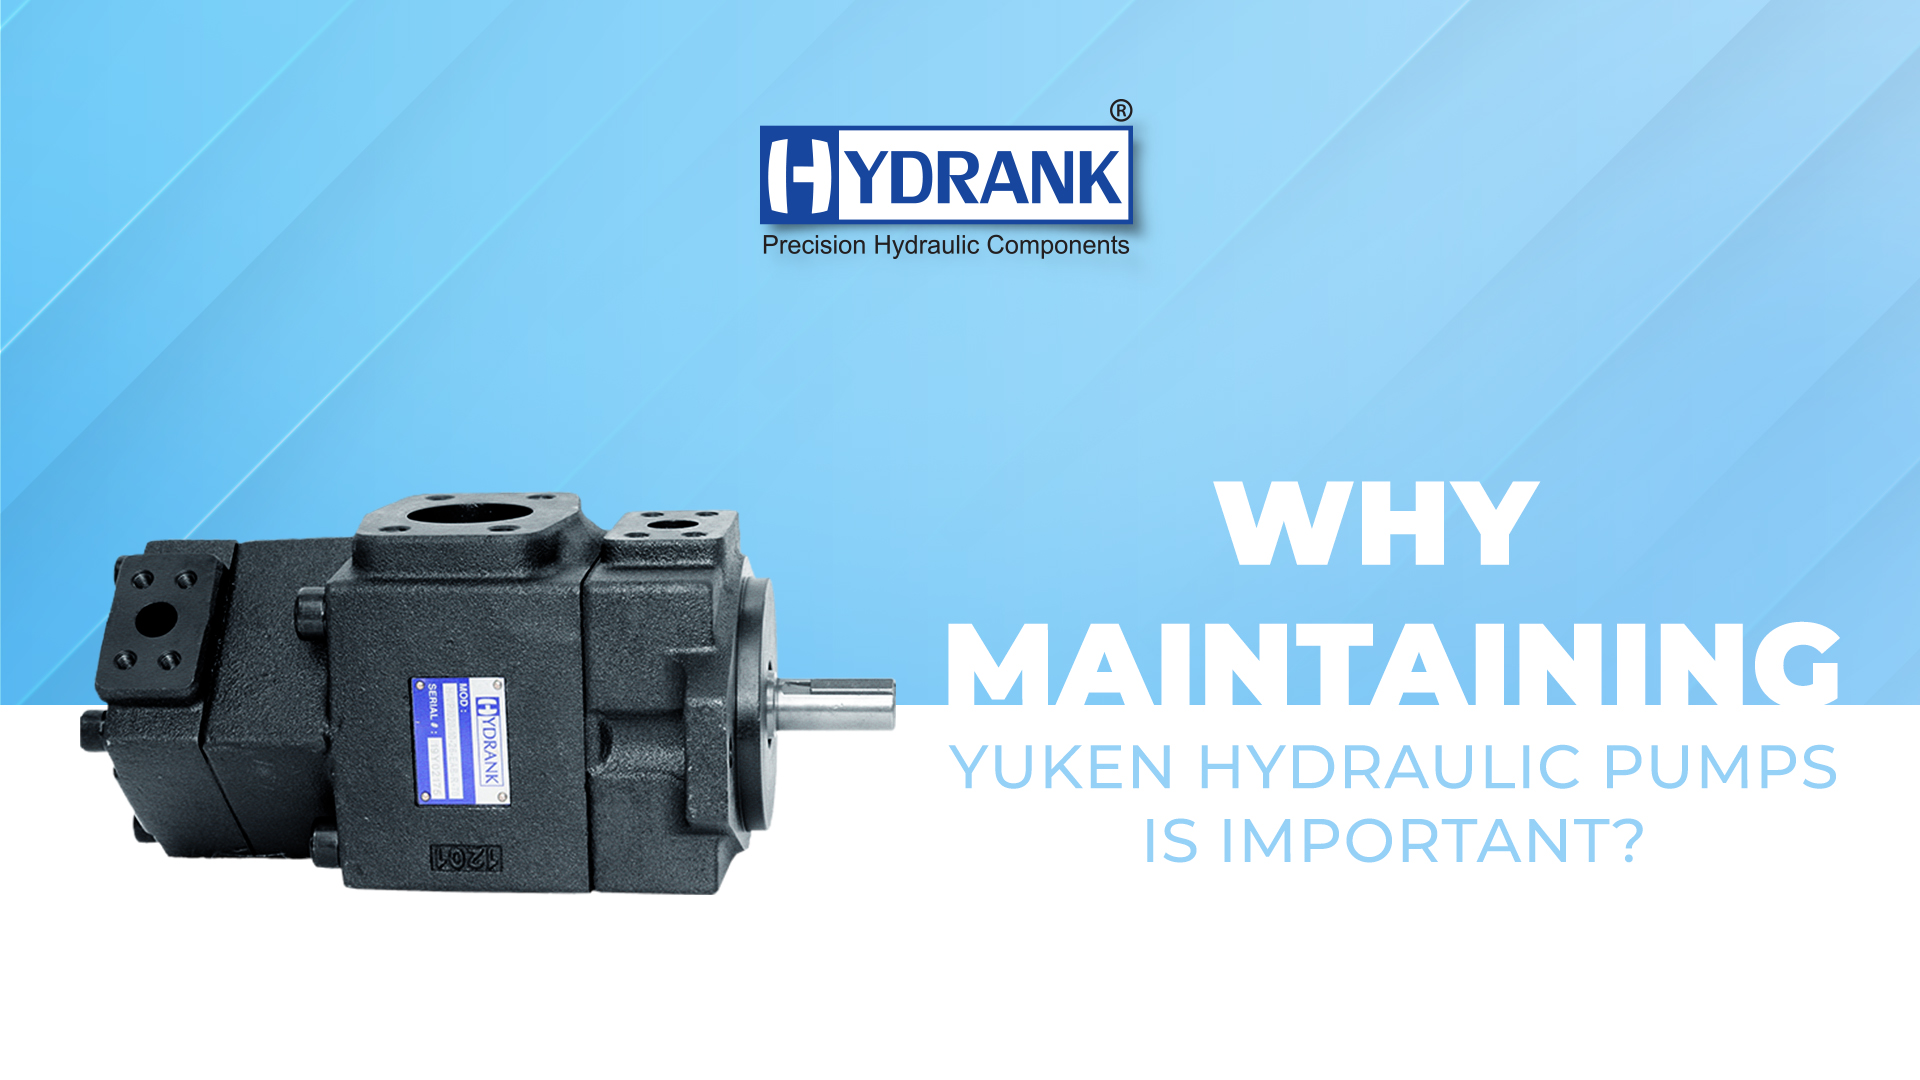 Why Maintaining Yuken Hydraulic Pumps Is Important?